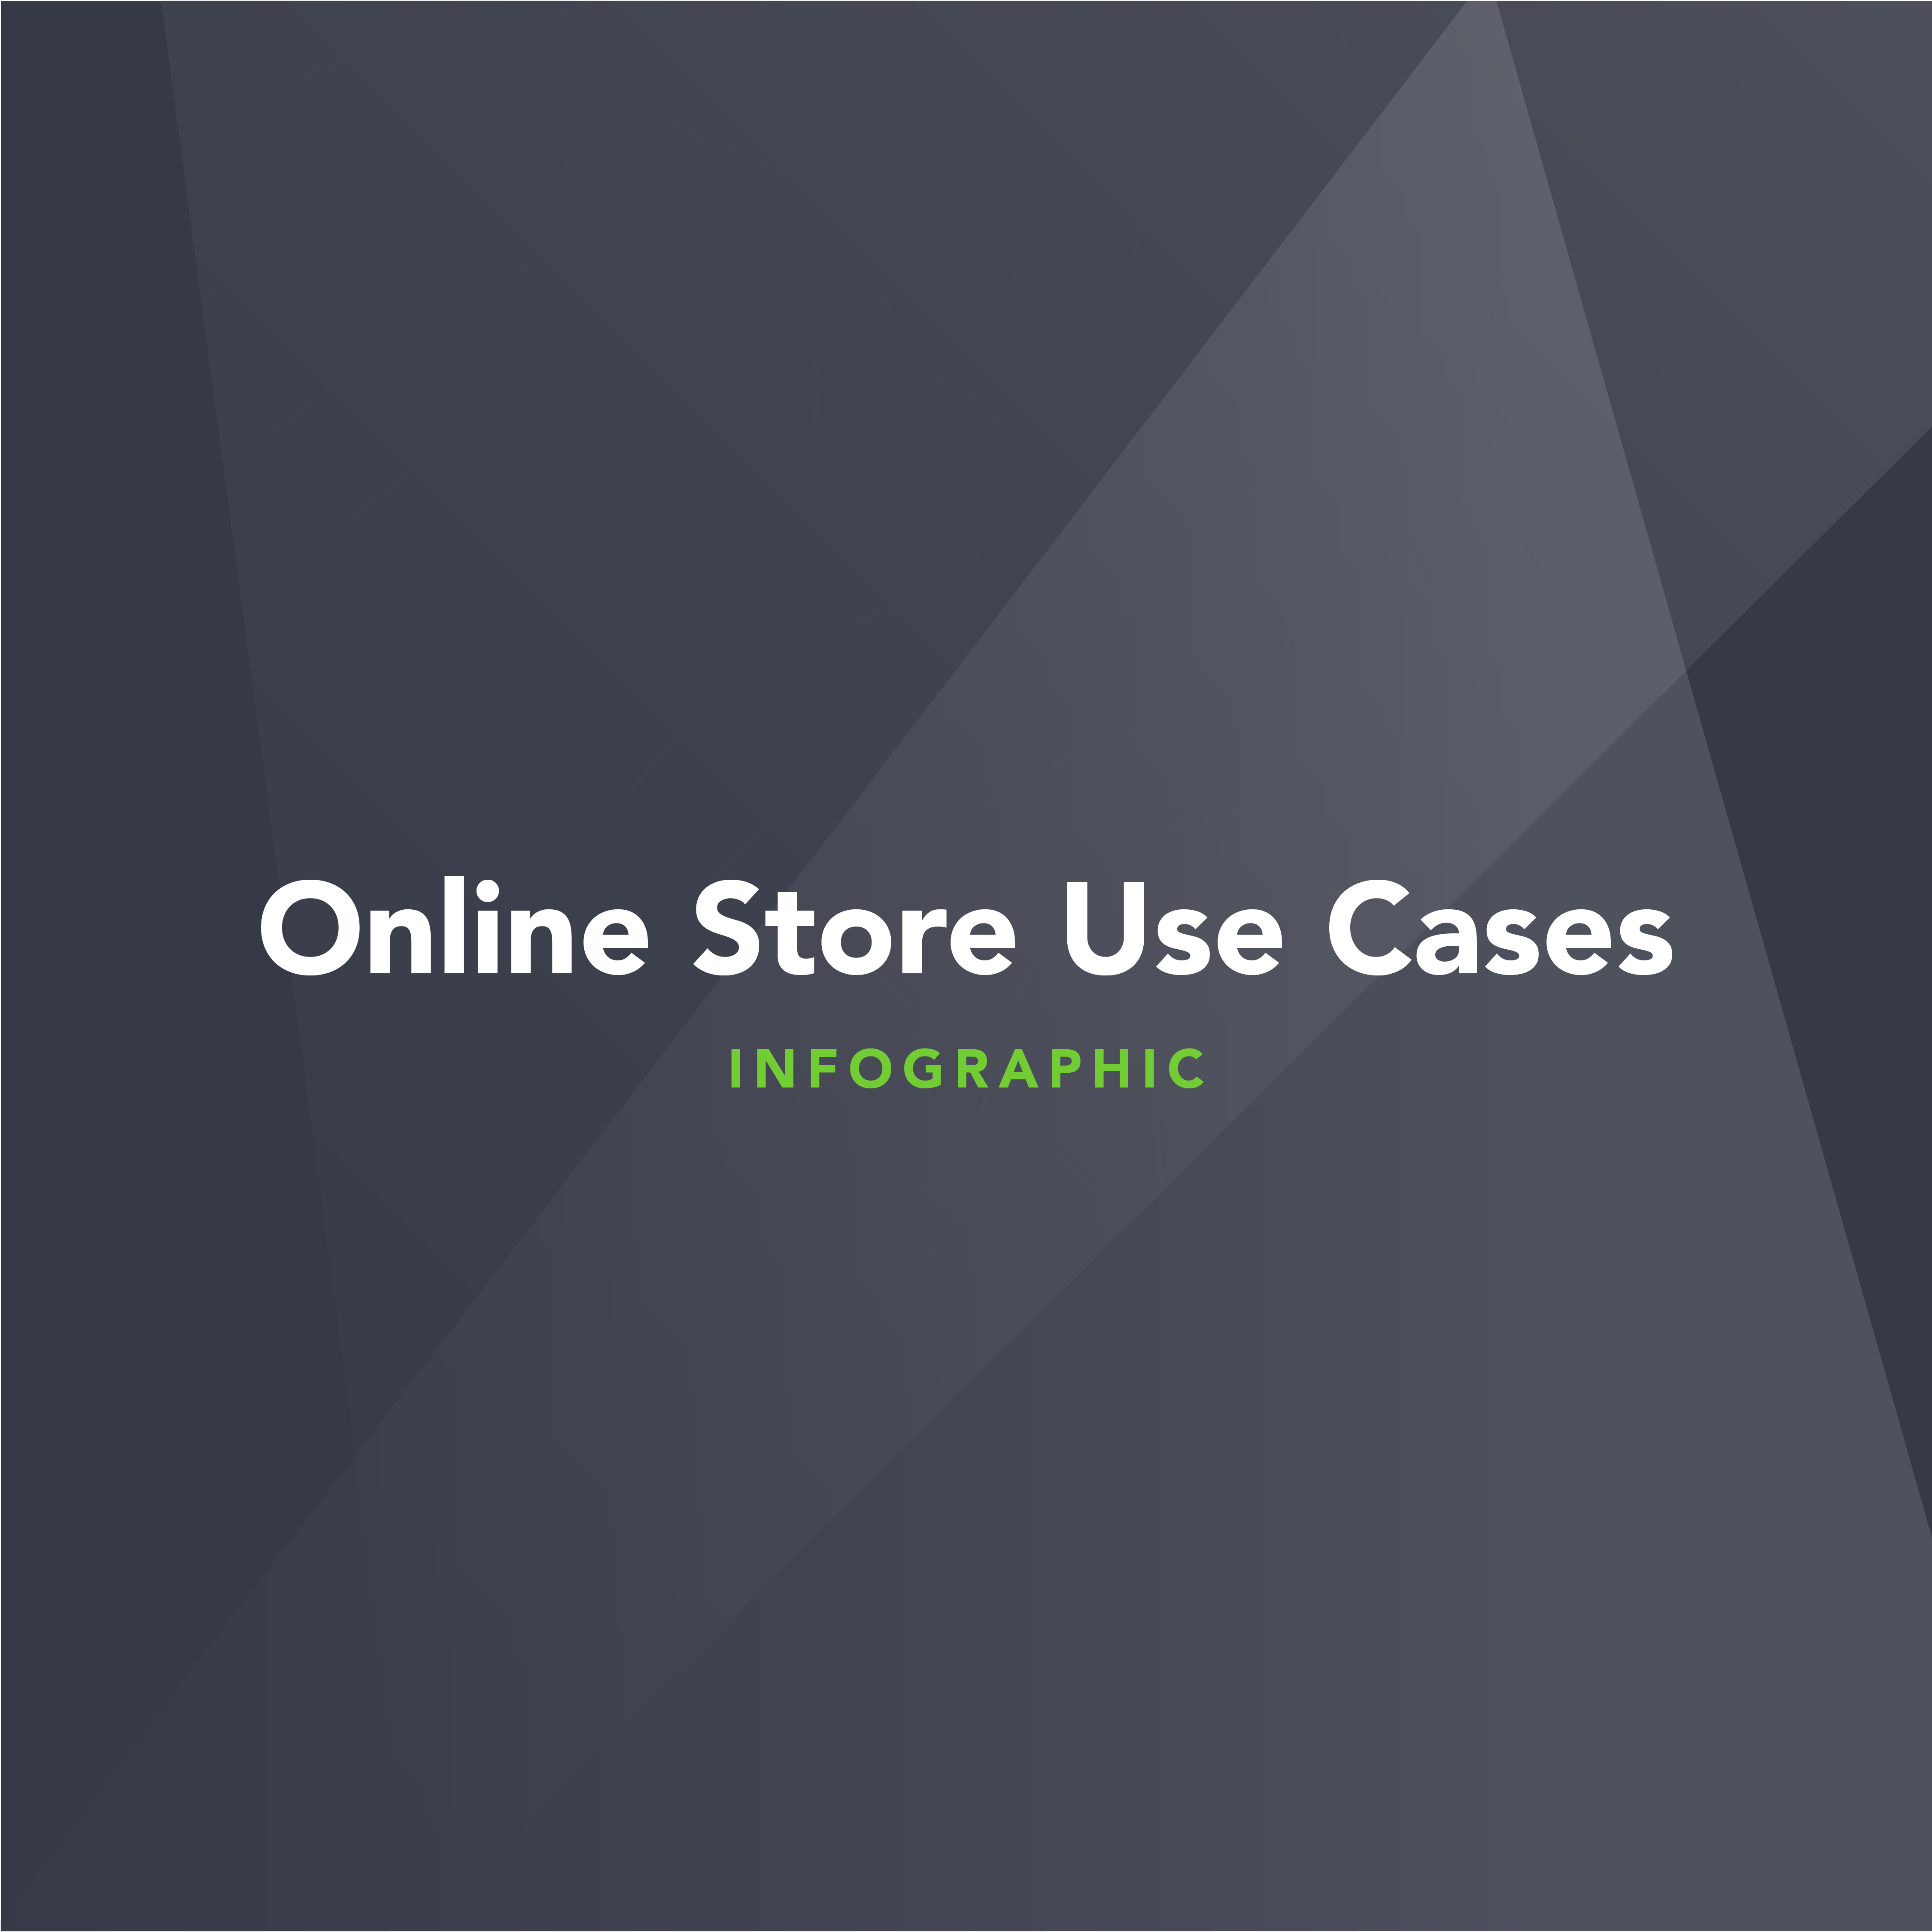 Online Store Use Cases | Infographic